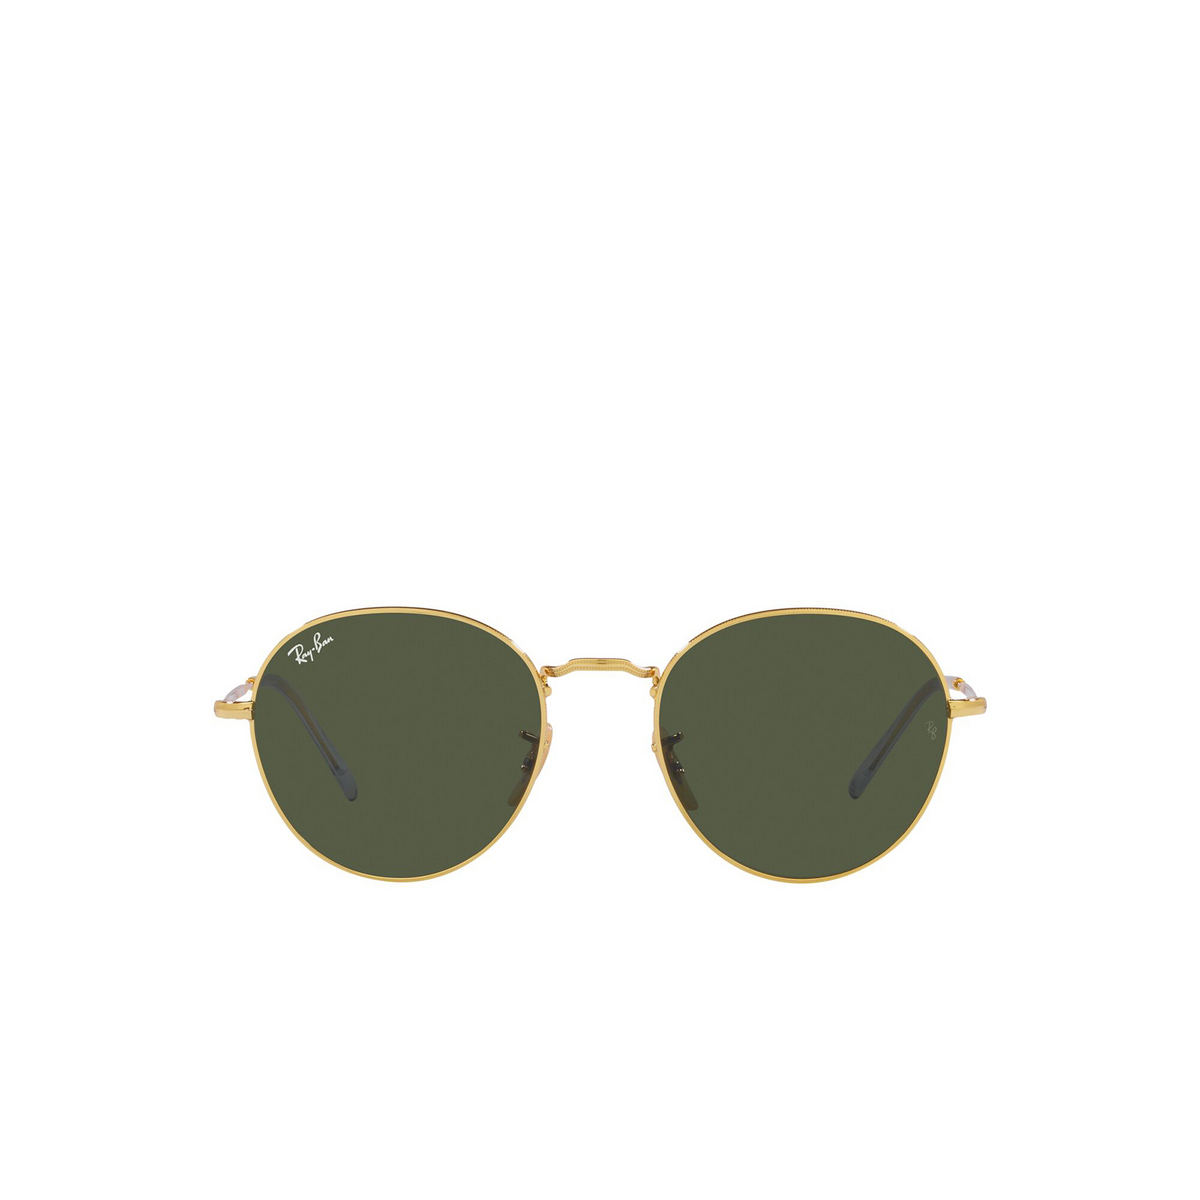 Ray-Ban® Round Sunglasses: David RB3582 color Arista 001/31 - front view.